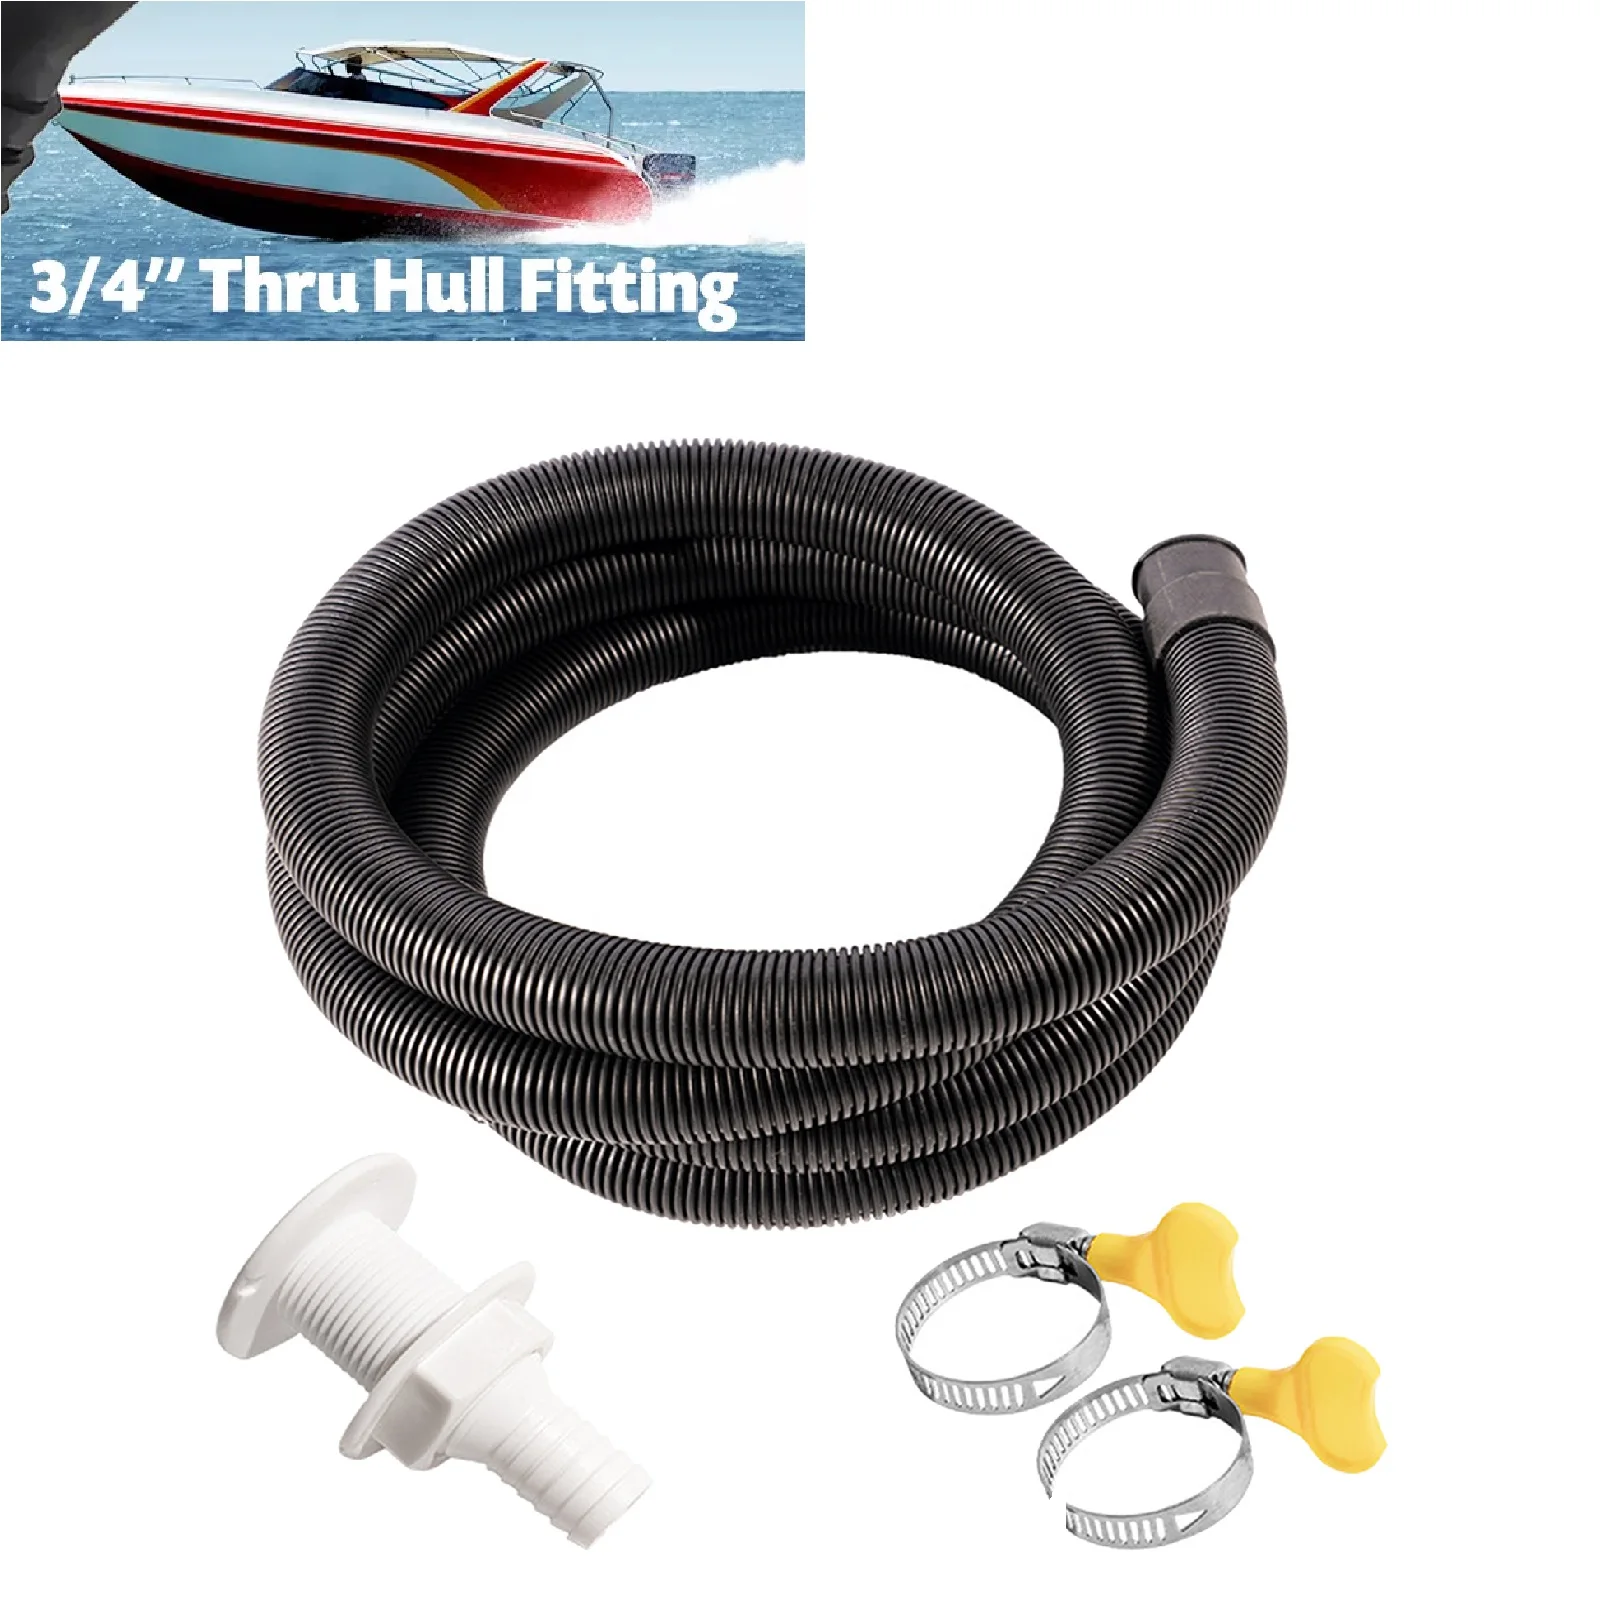 Flexible Bilge Pump Hose Installation Kit 3/4-Inch Diameter 6.6 FT for Boats with 2 Clamps and Thru-Hull Fitting bilge pump hose installation kit 6 6 ft plastic hose 3 4 inch diameter with 2 hose clamps and thru hull fitting